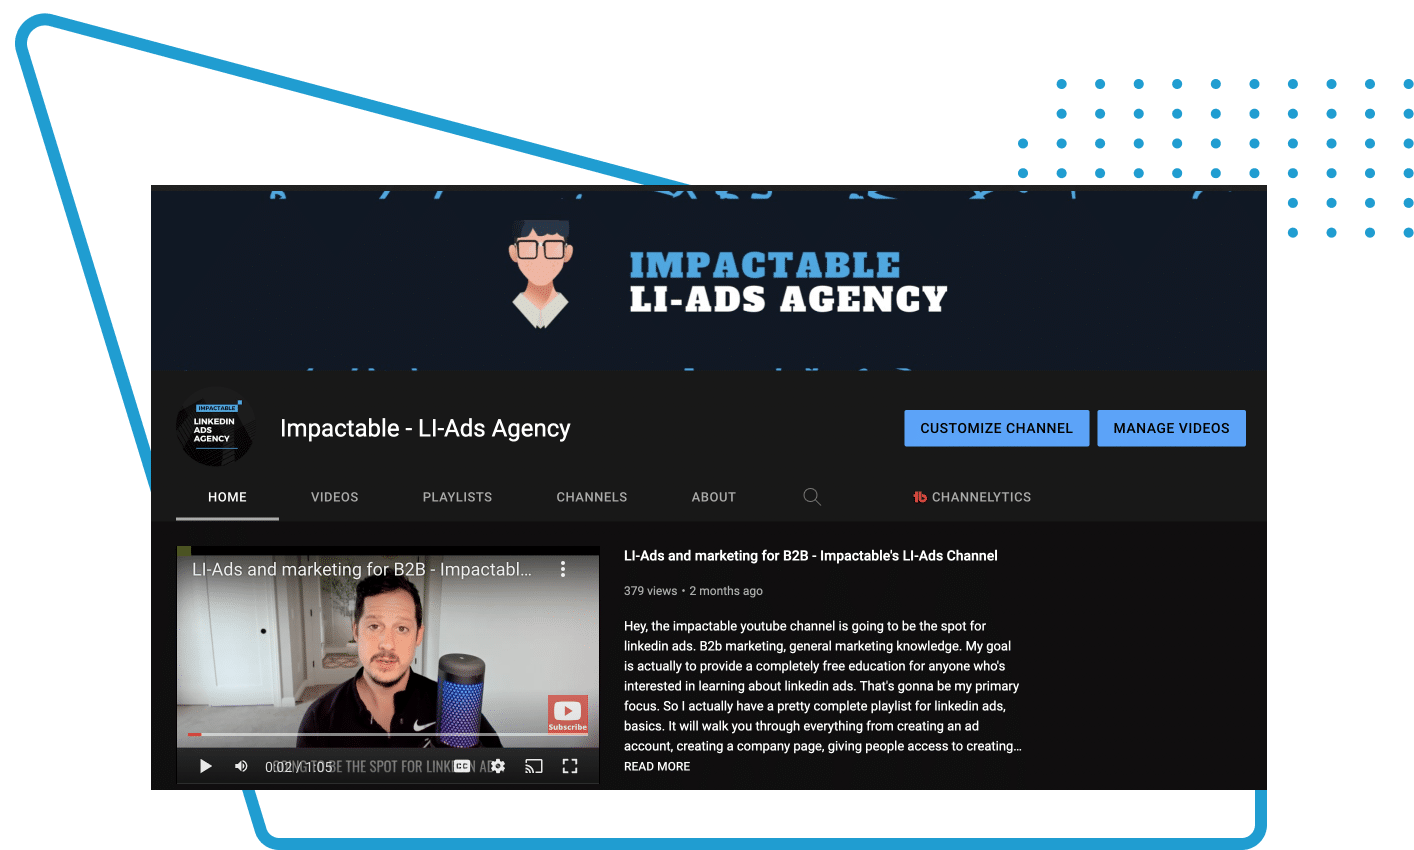 Impactable's YouTube channel that covers everything related to Linkedin ads